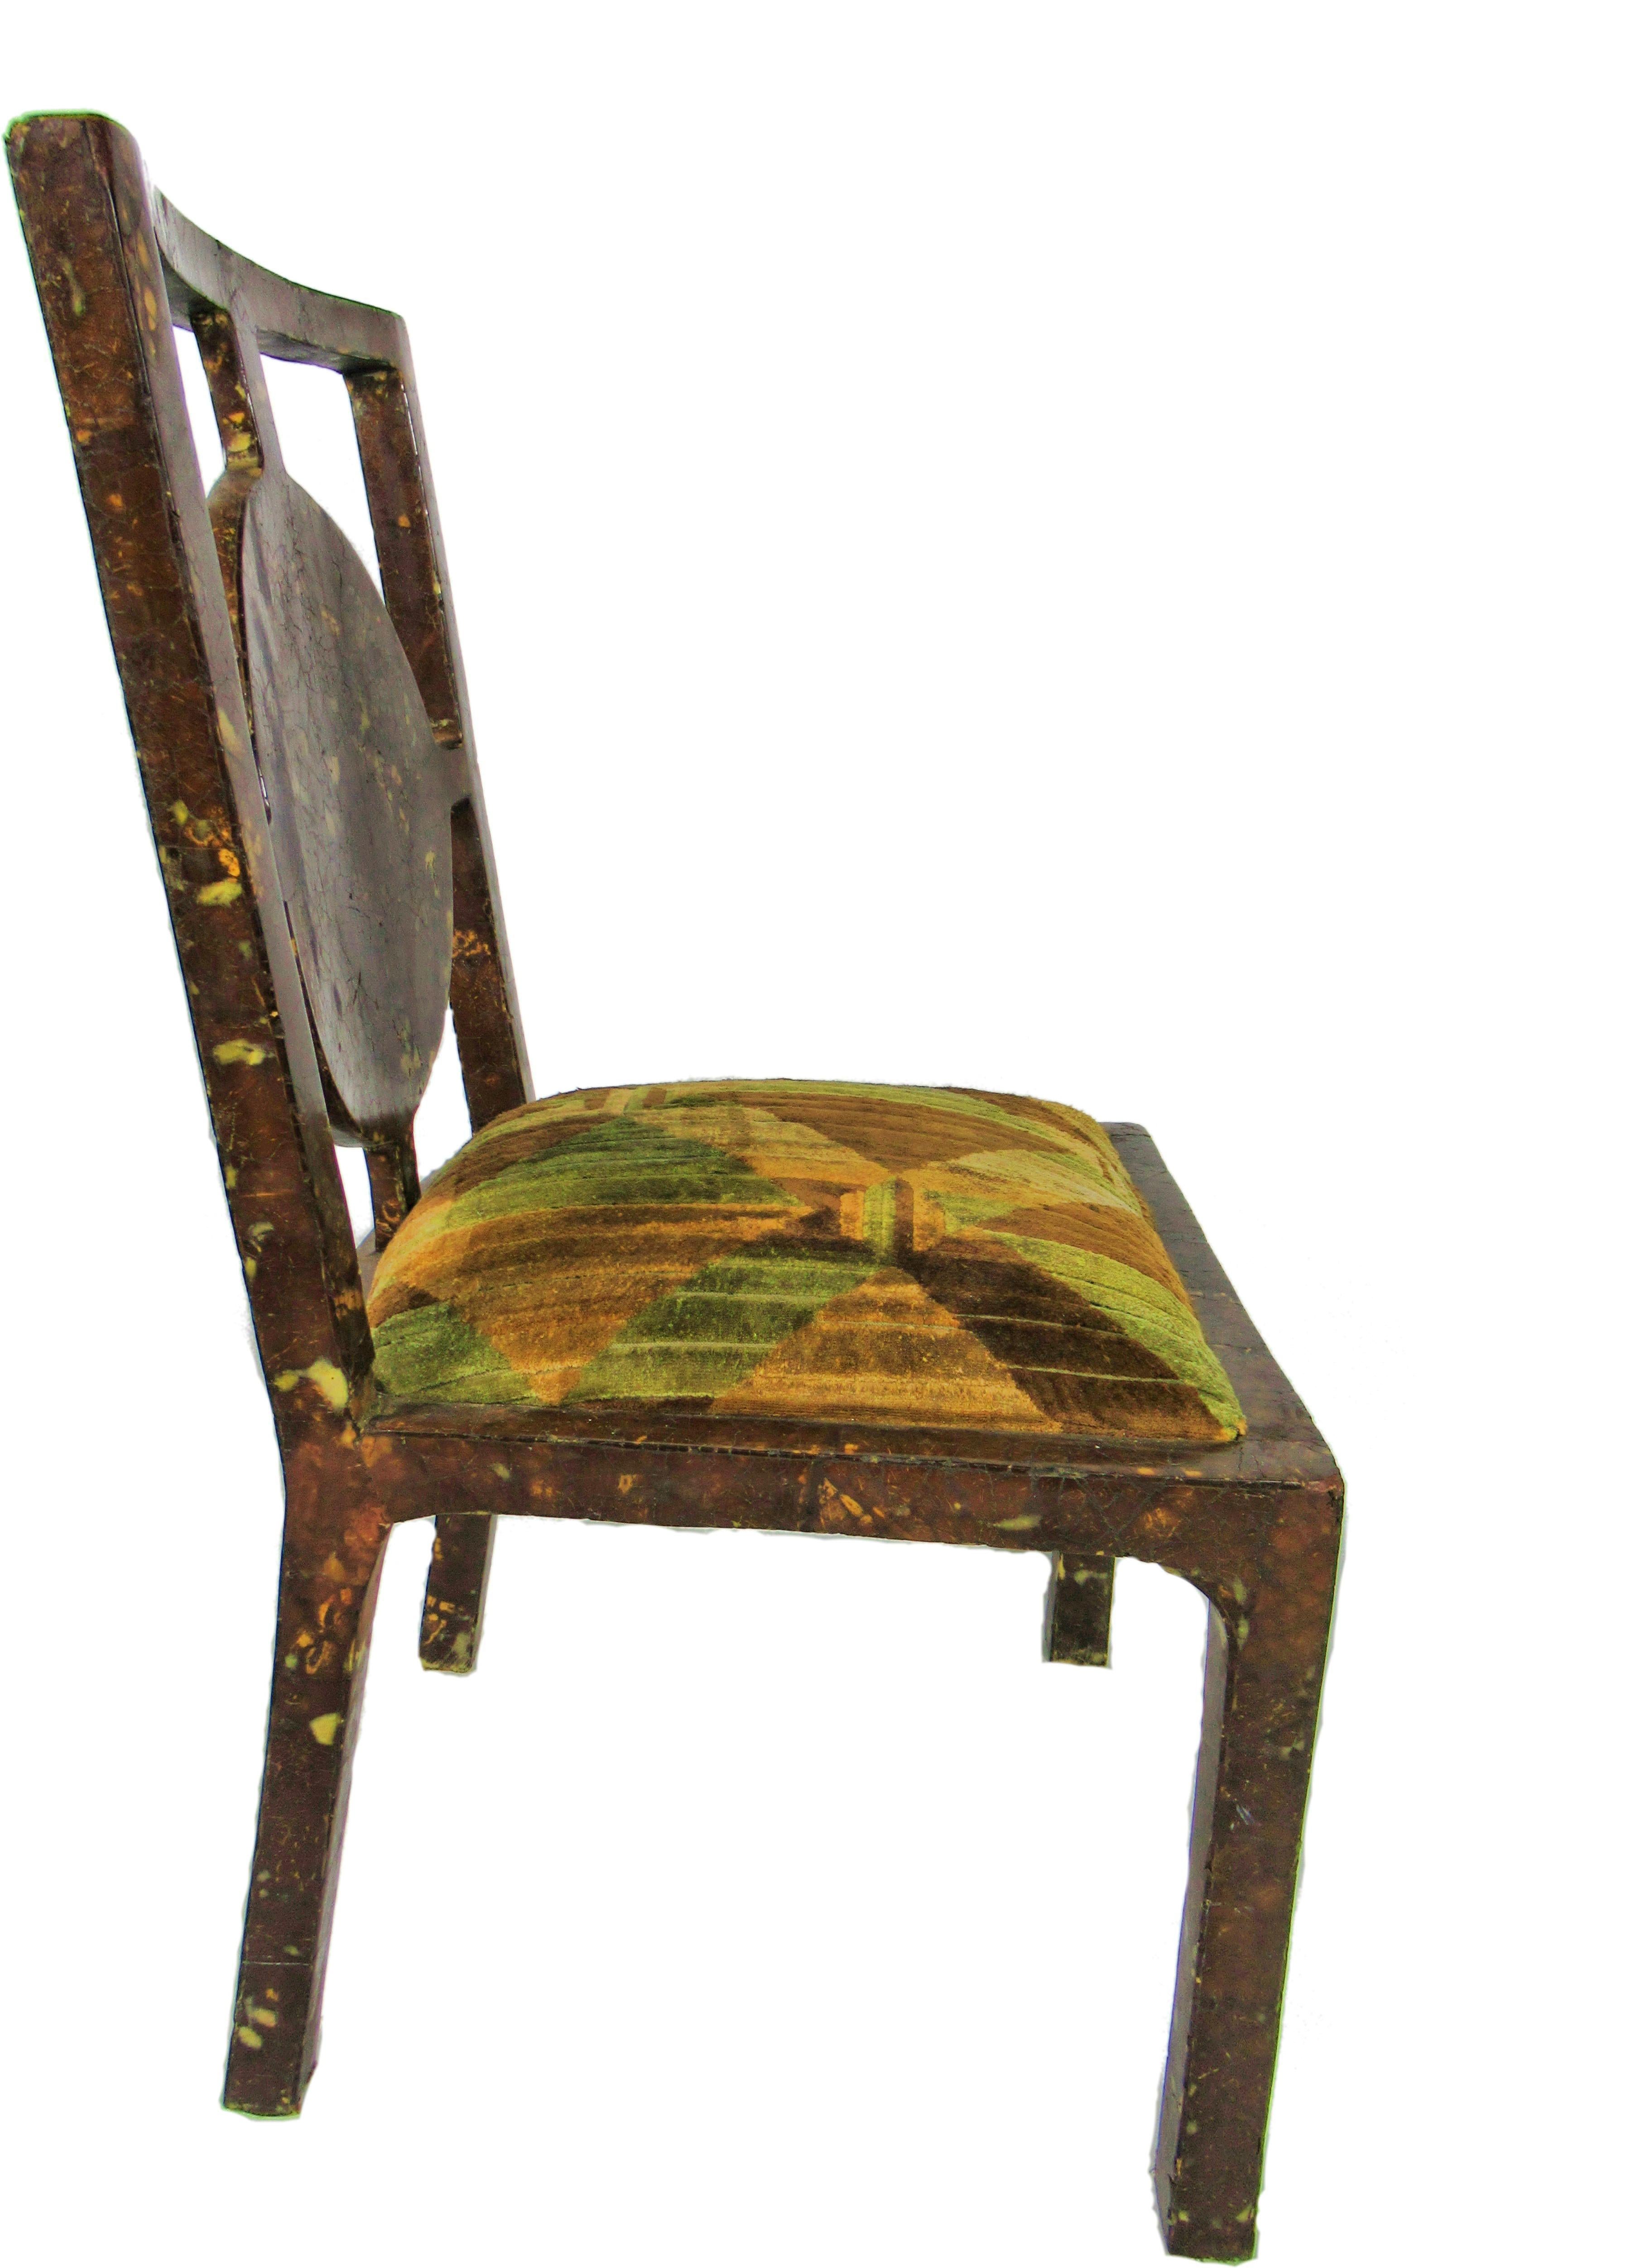 the frame overall in coconut veneer, the square slightly curved back with circular center, on square parsons legs.